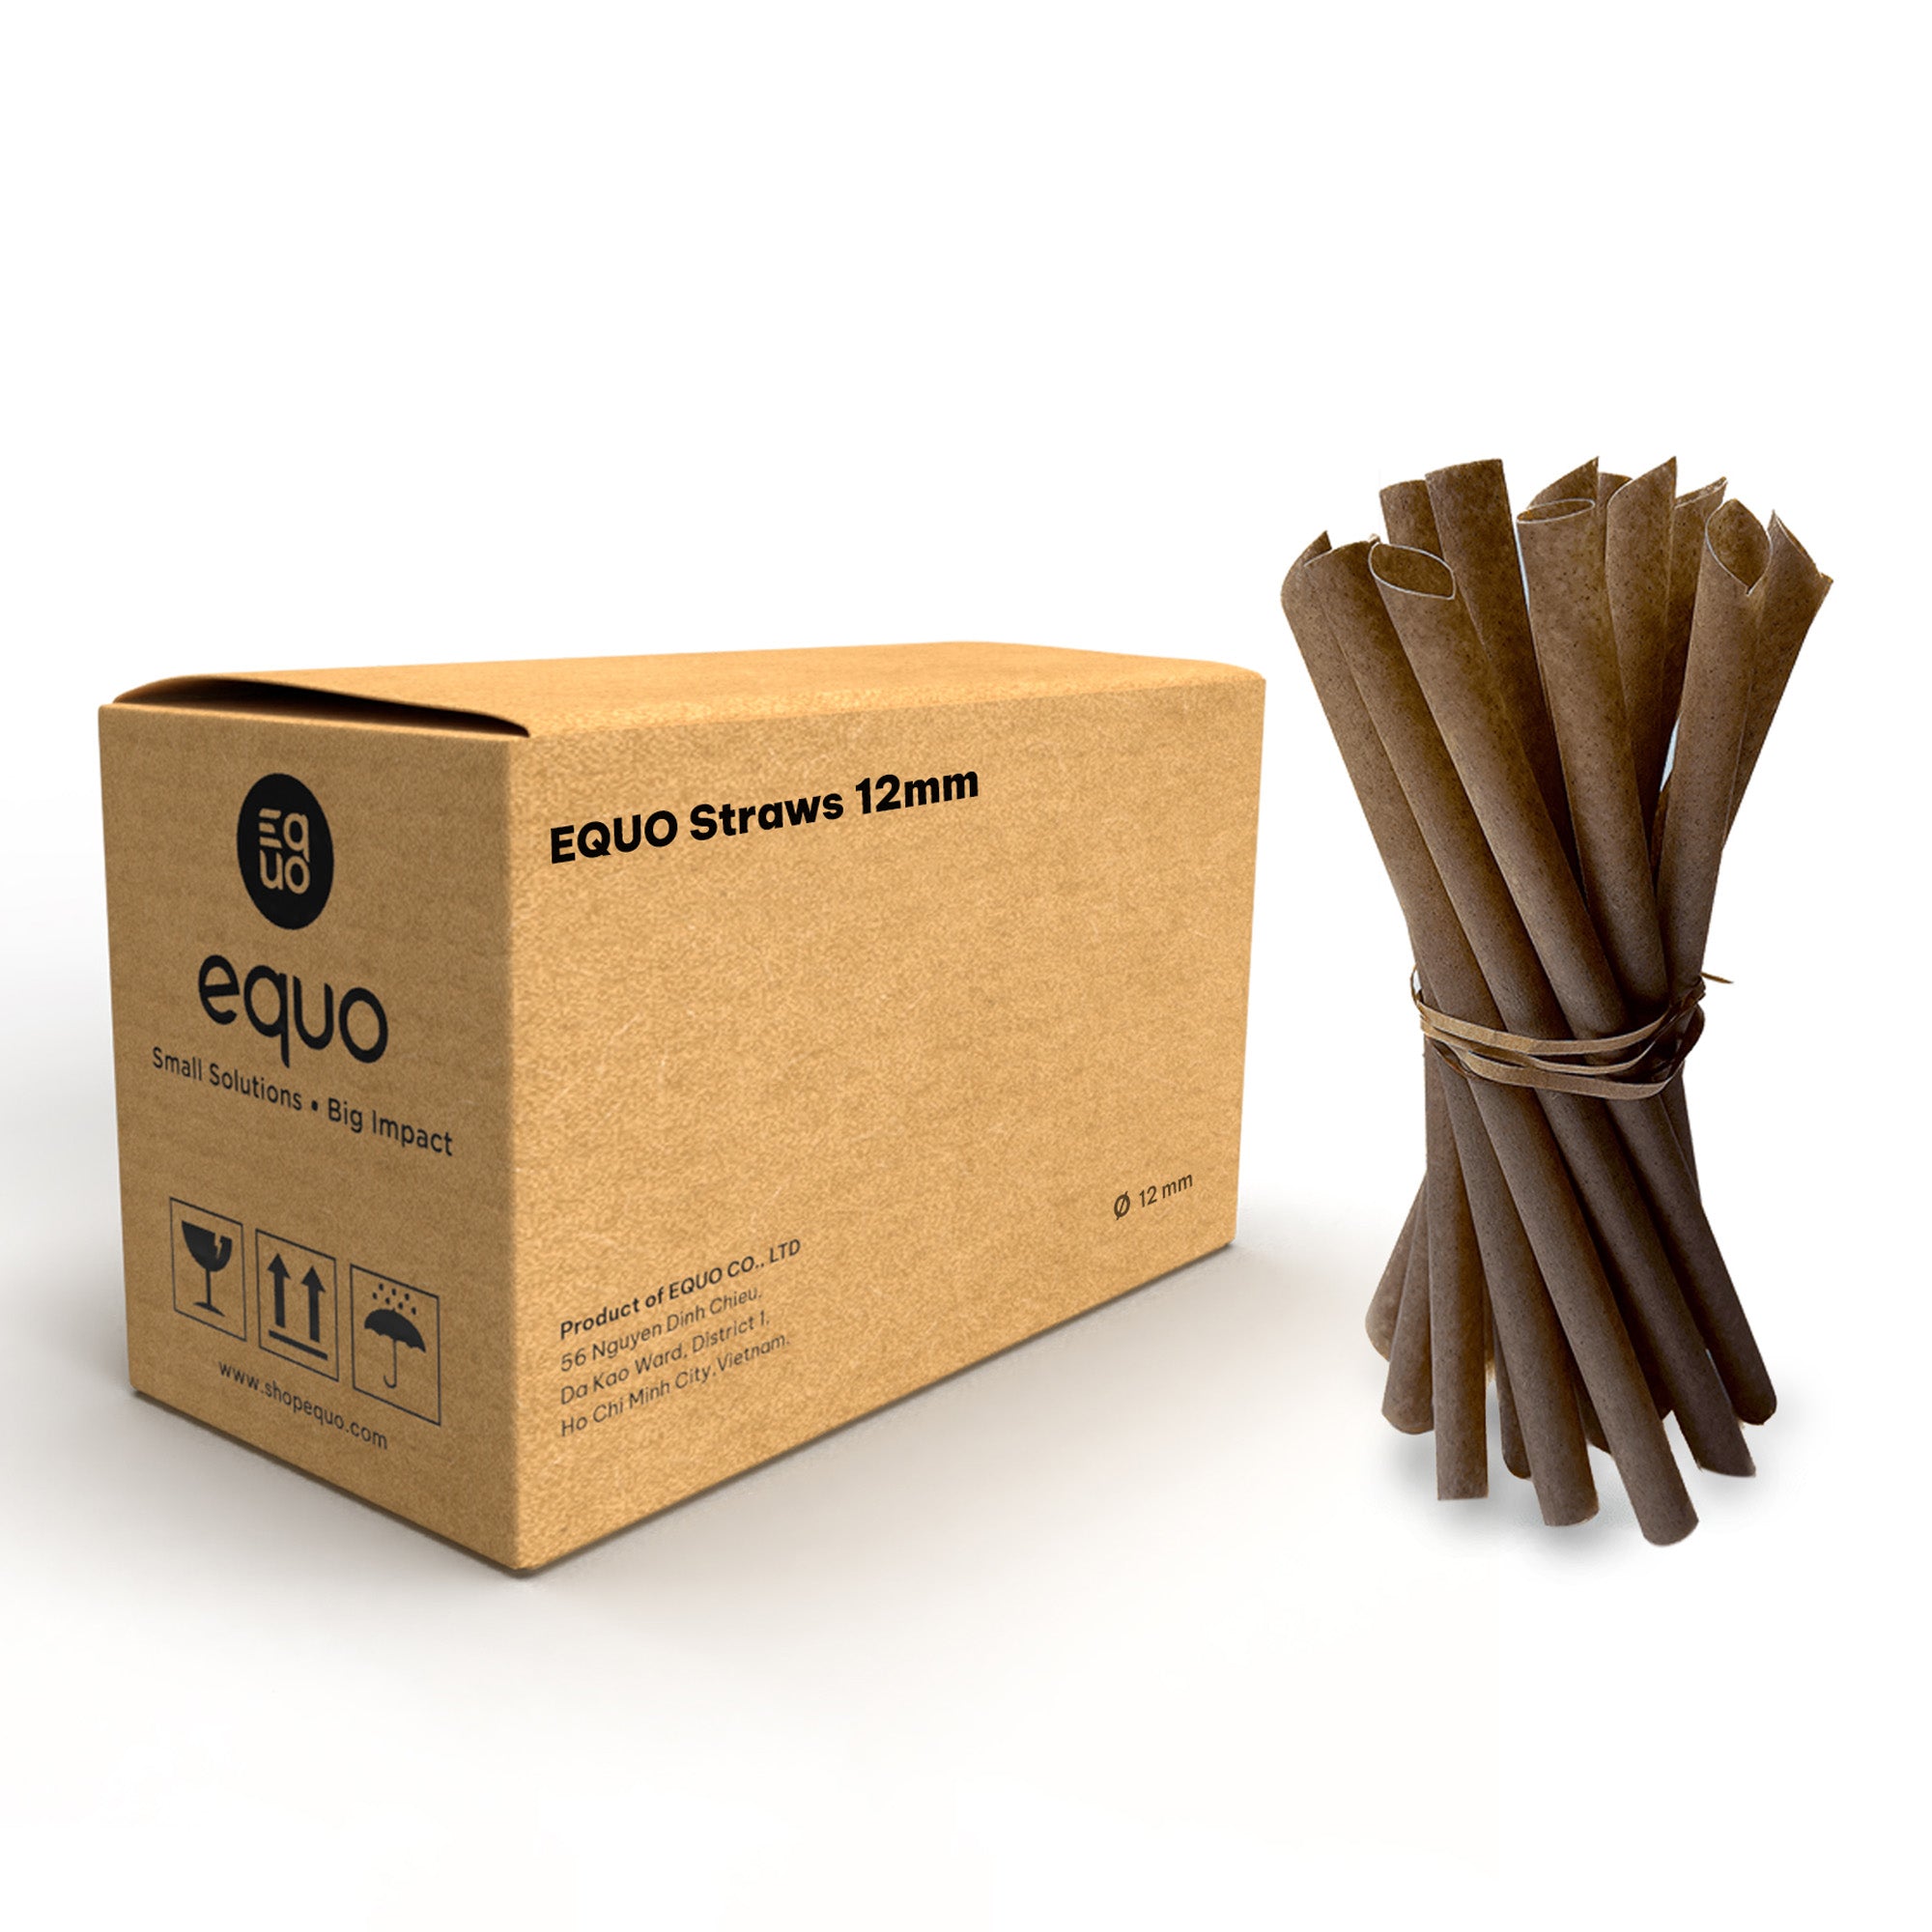 Coffee Drinking Straws (Wholesale/Bulk), BOBA/Bubble Tea Size - 1000 count by EQUO